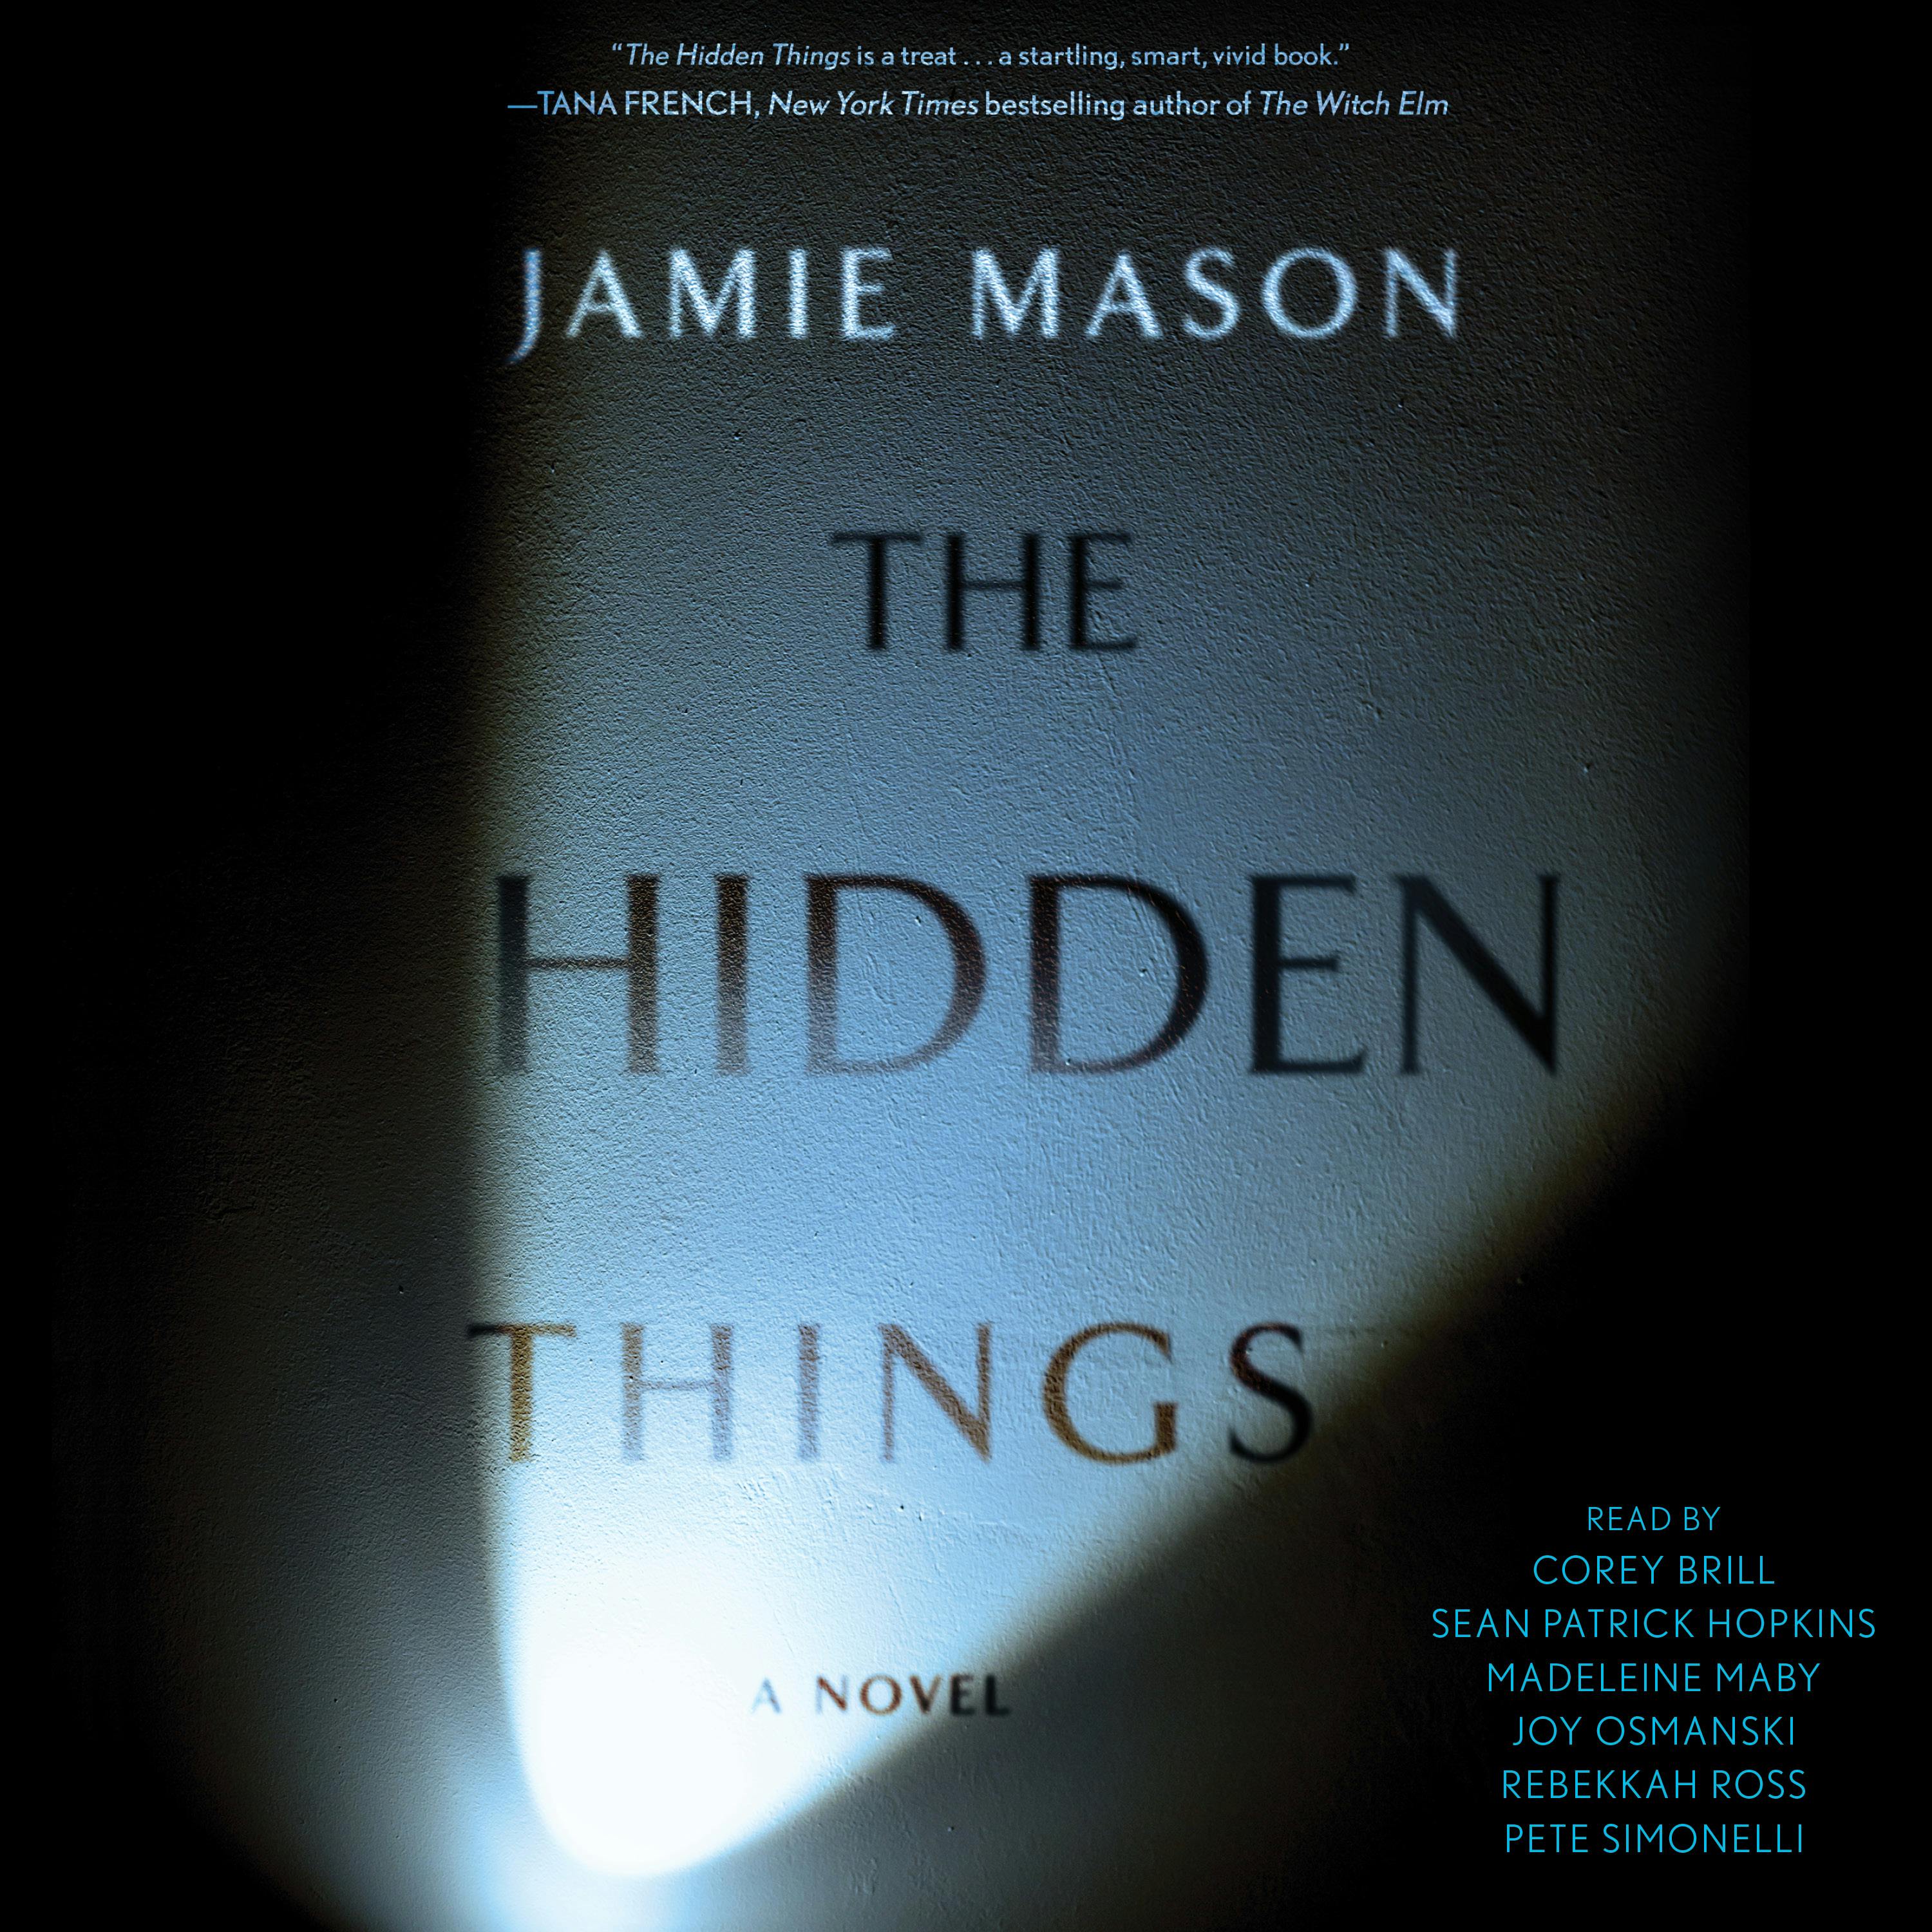 The Hidden Things - undefined